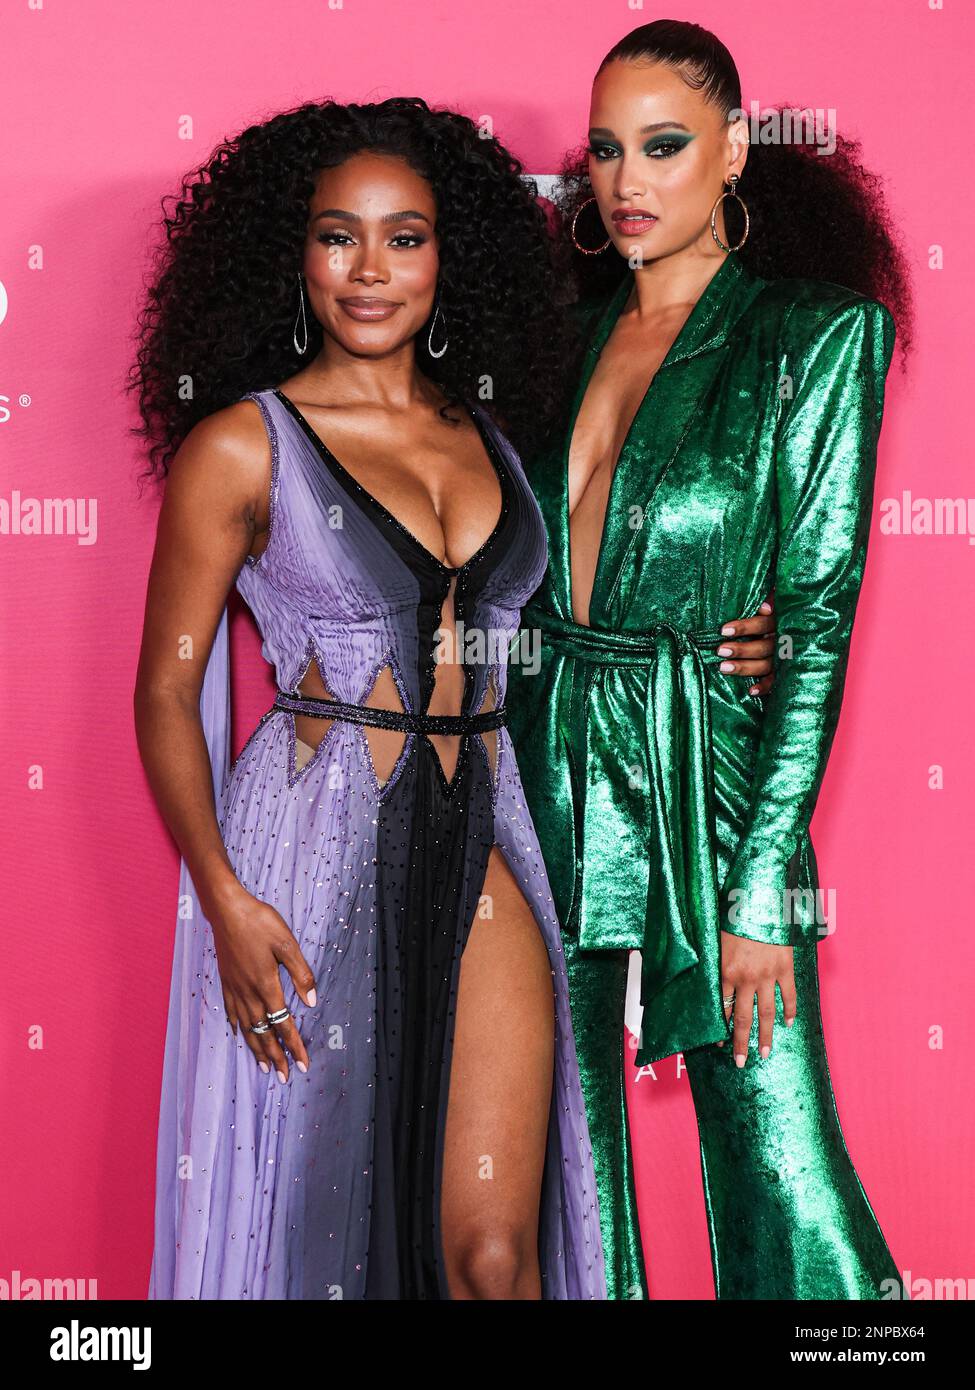 Pasadena, United States. 25th Feb, 2023. PASADENA, LOS ANGELES, CALIFORNIA, USA - FEBRUARY 25: Shannon Thornton and Elarica Johnson pose in the press room at the 54th Annual NAACP Image Awards held at the Pasadena Civic Auditorium on February 25, 2023 in Pasadena, Los Angeles, California, United States. (Photo by Xavier Collin/Image Press Agency) Credit: Image Press Agency/Alamy Live News Stock Photo